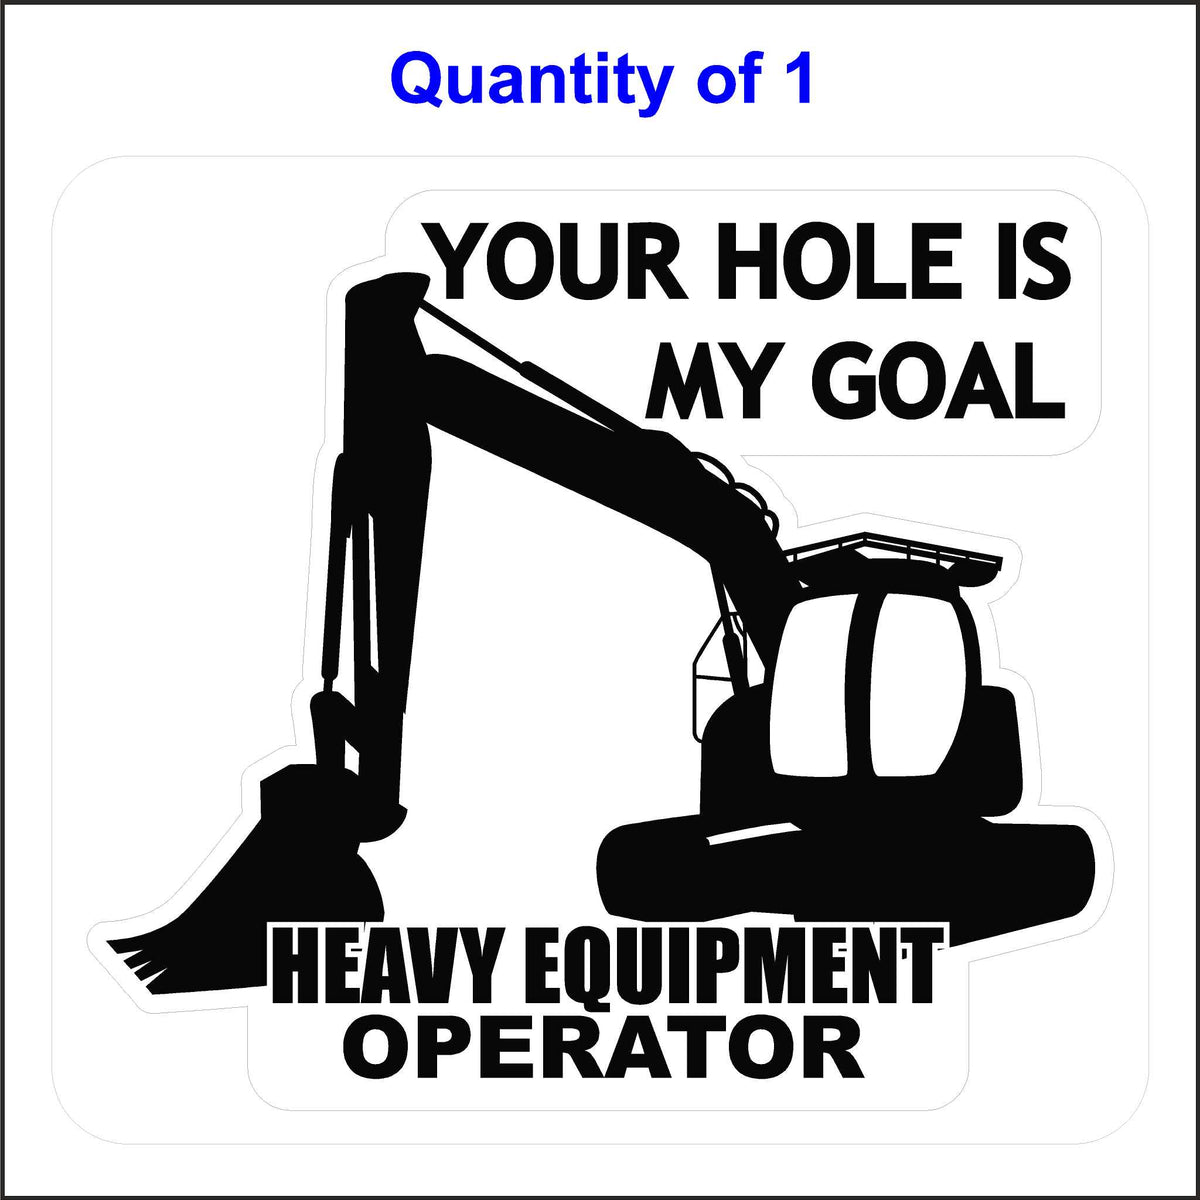 Heavy Equipment Operator Sticker. Your Hole Is My Goal Sticker.